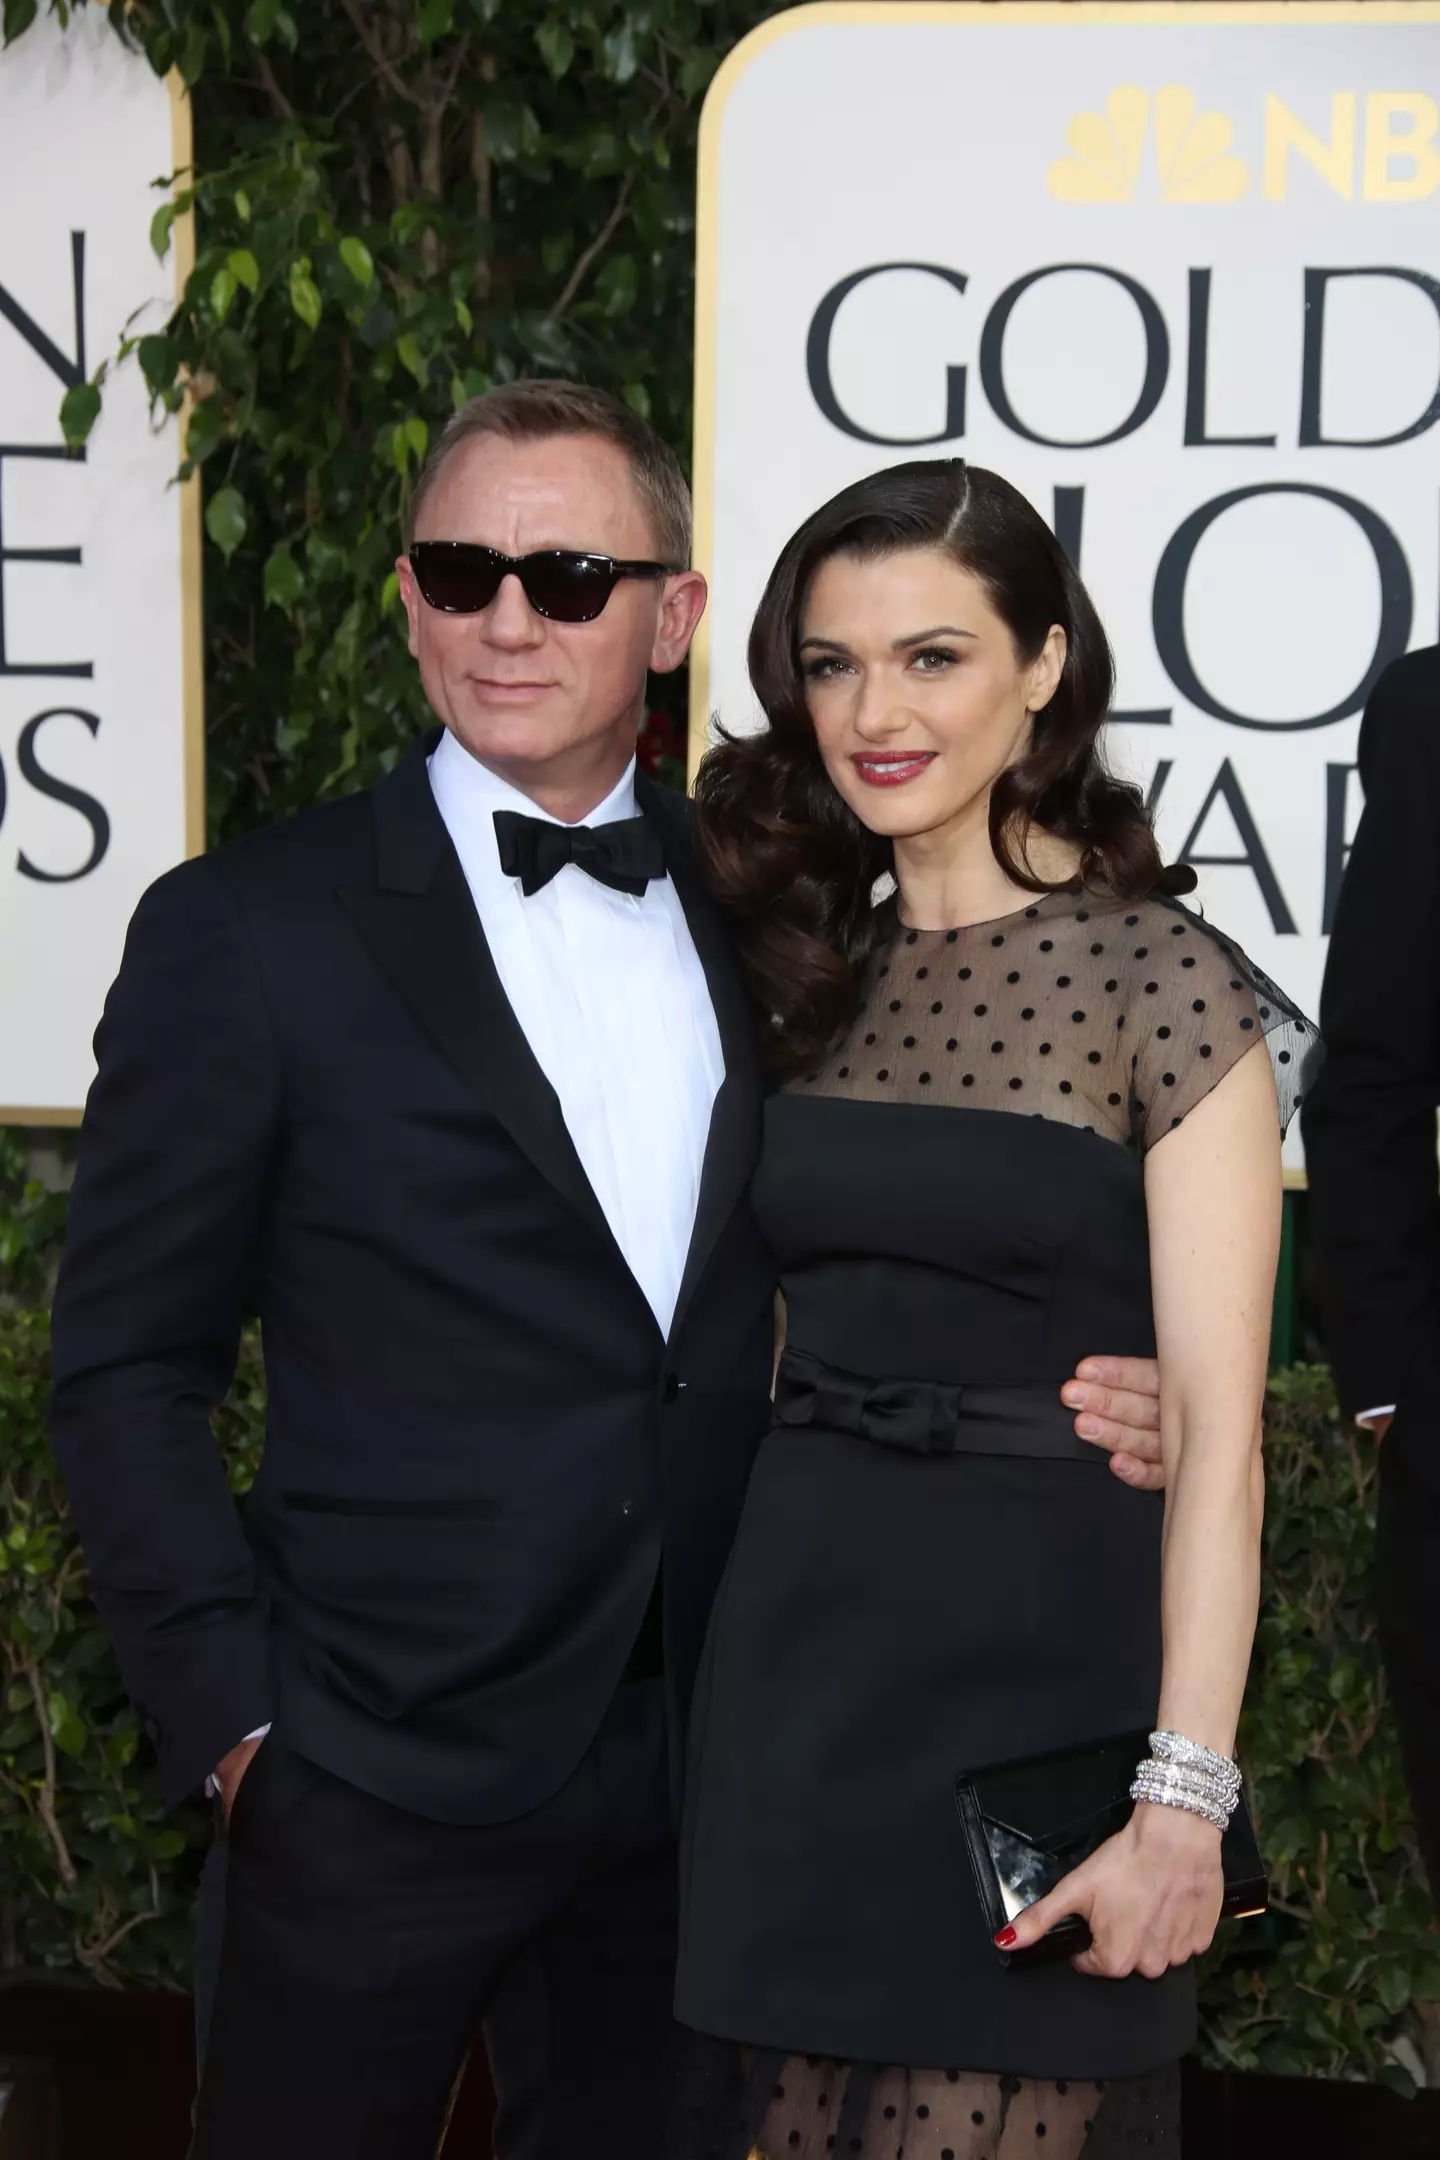 Weisz revealed that the marriage 'just happened'.